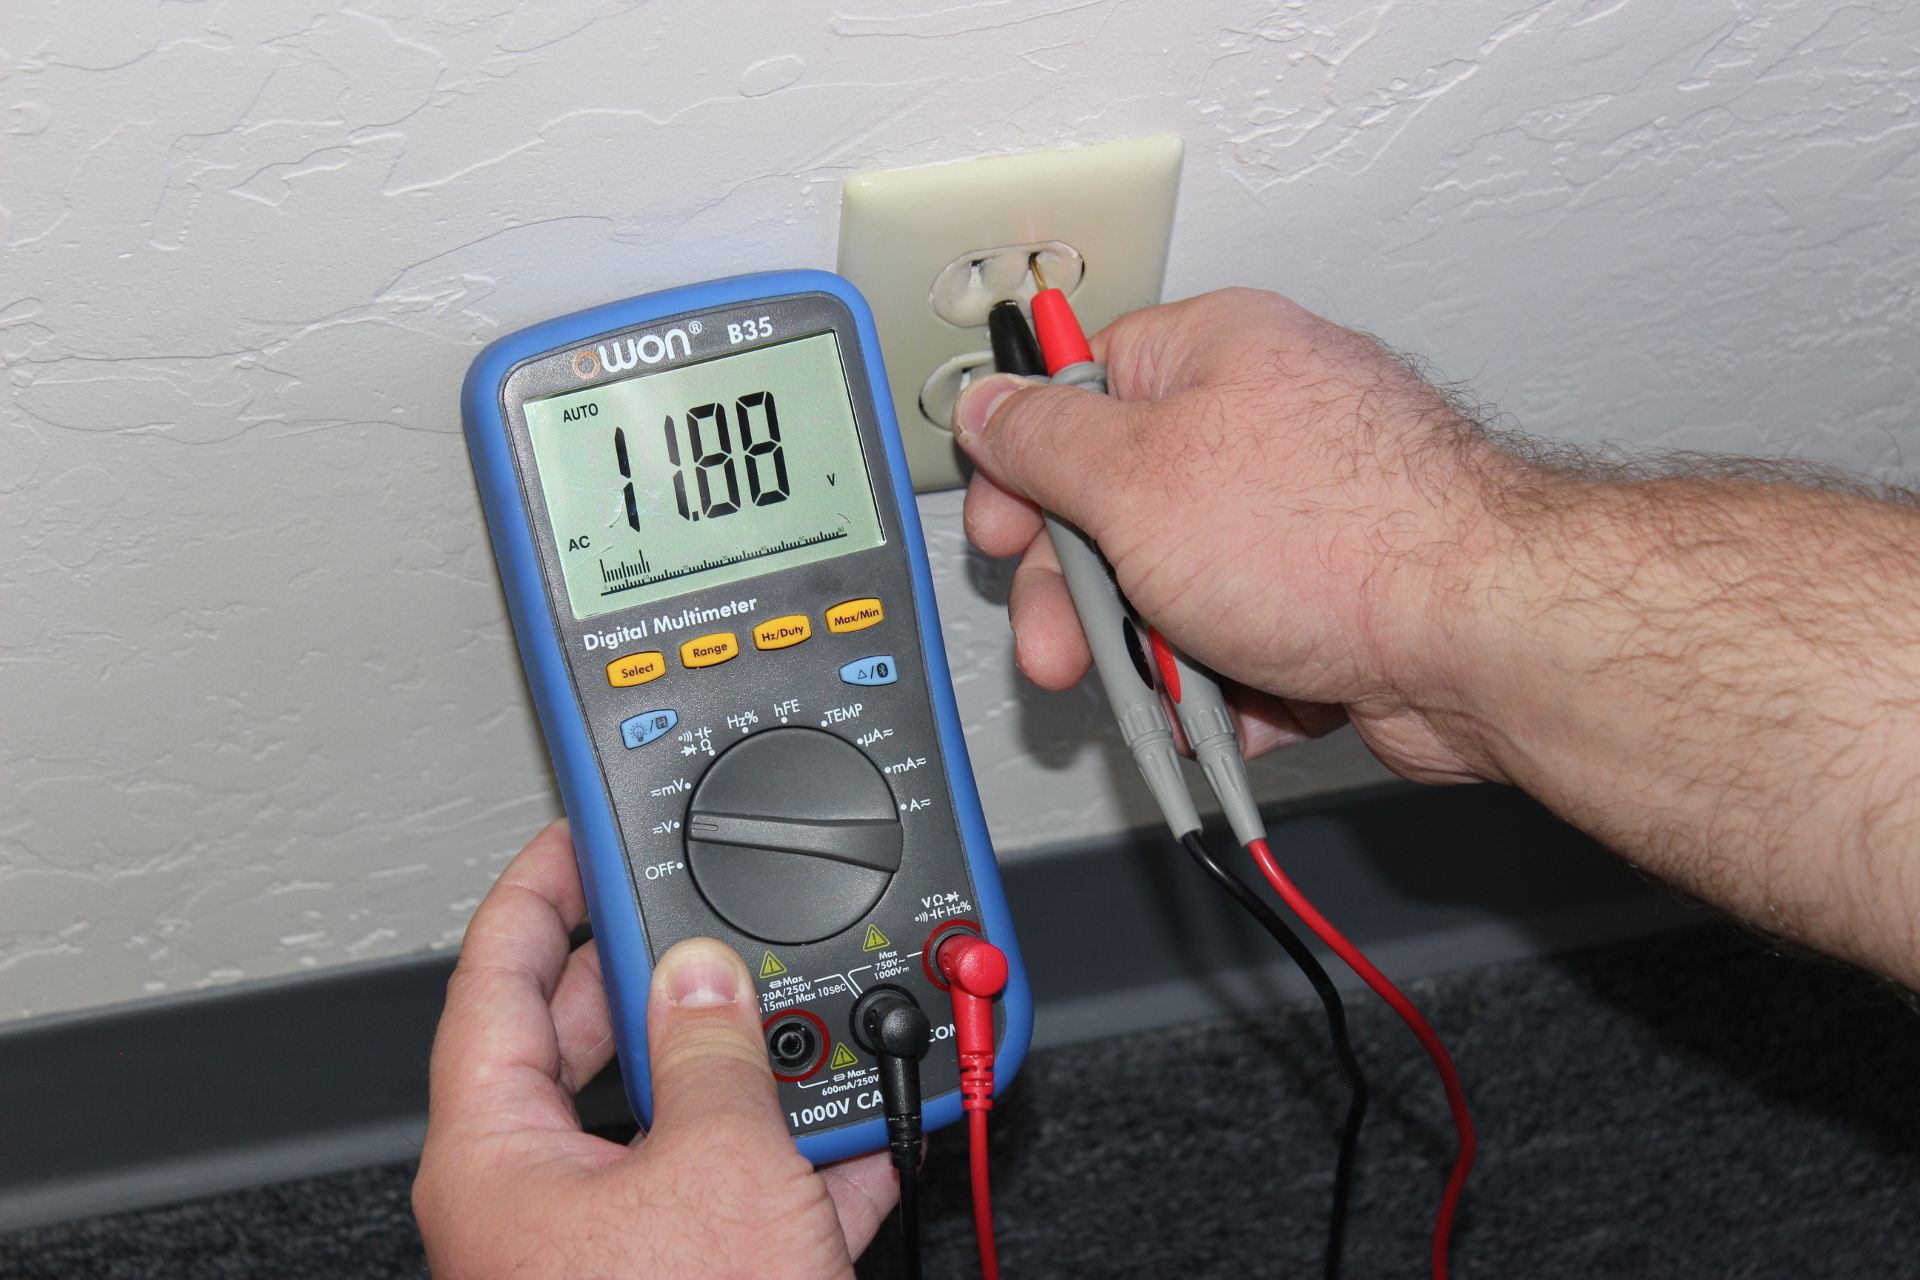 How To Test An Outlet Testing an Electrical Outlet Using a Digital Multimeter | Simply Smarter  Circuitry Blog